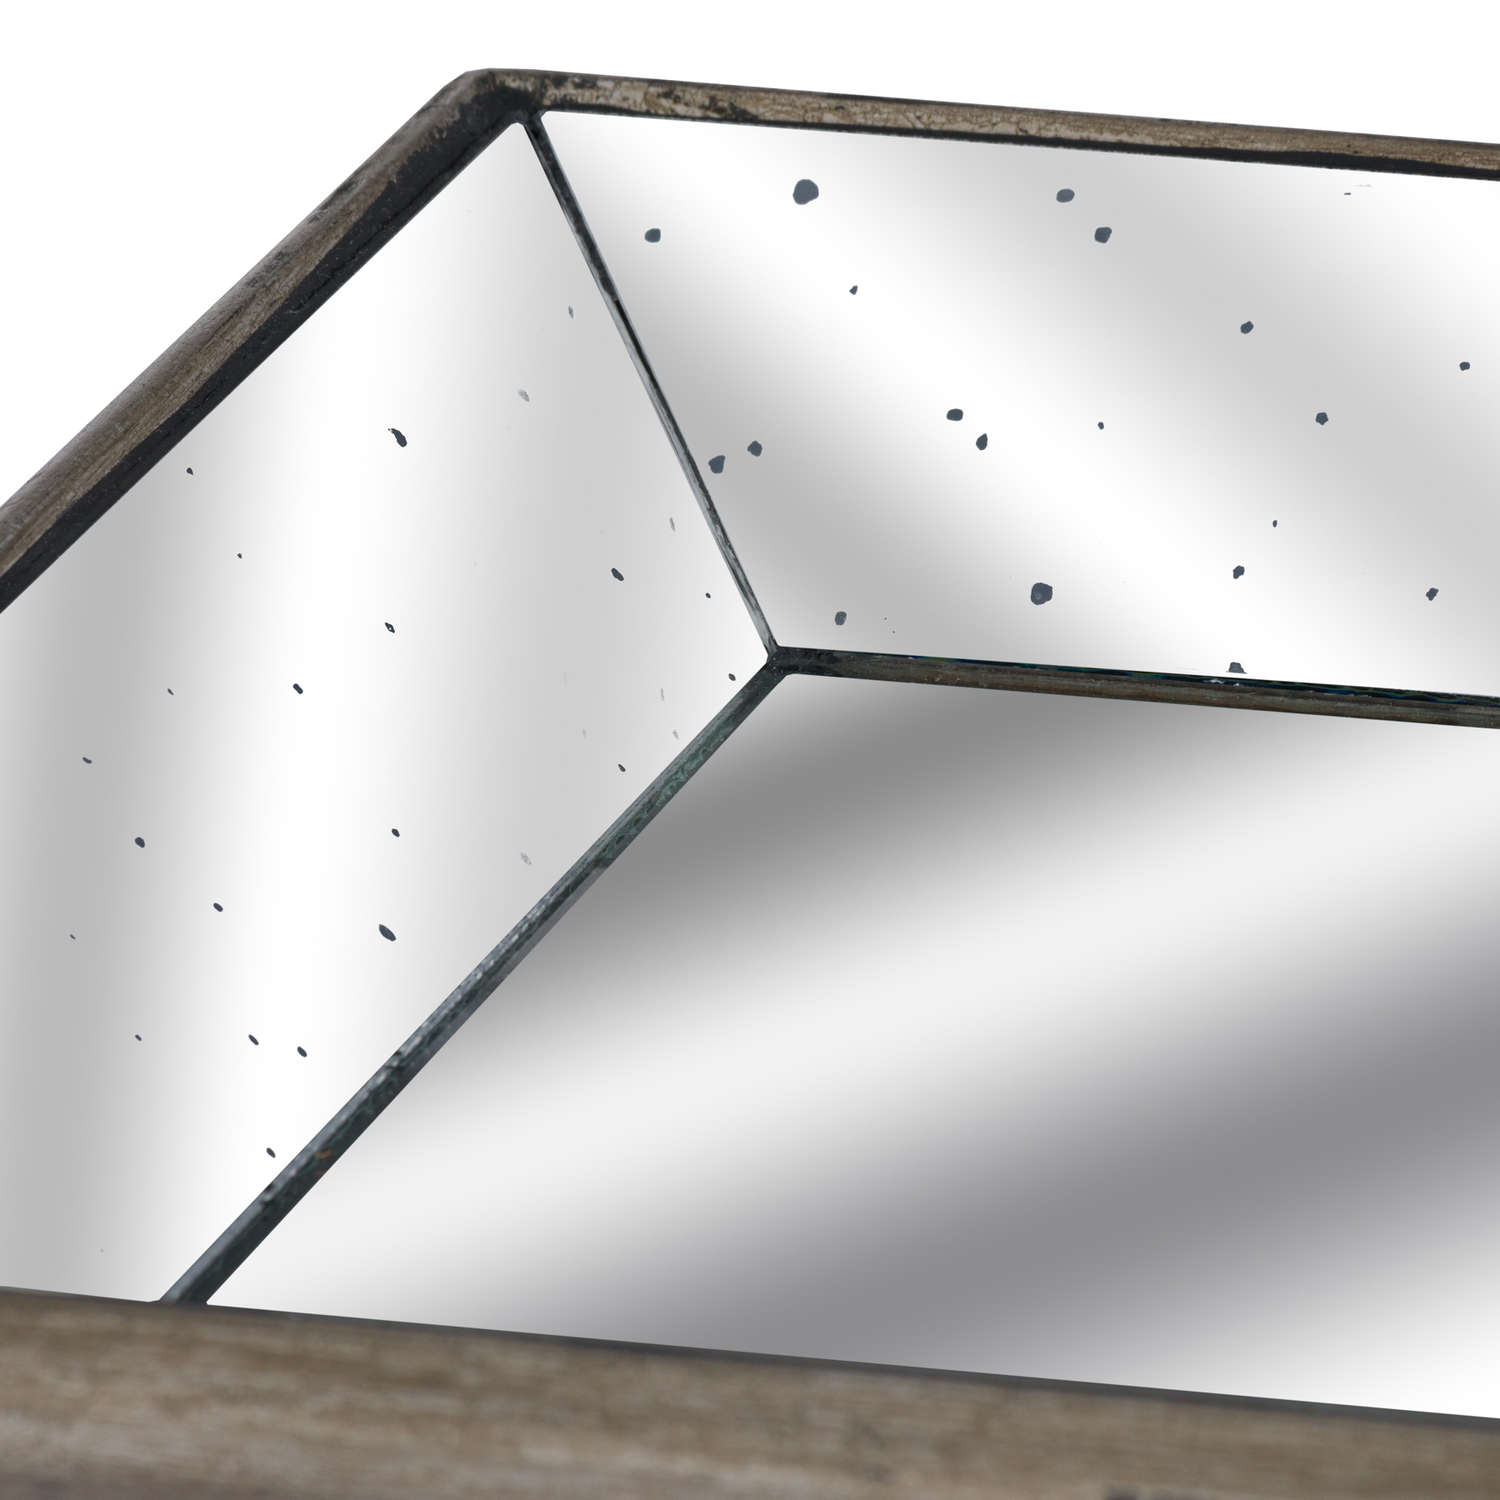 Astor Distressed Mirrored Tray With Wooden Detailing - Image 2